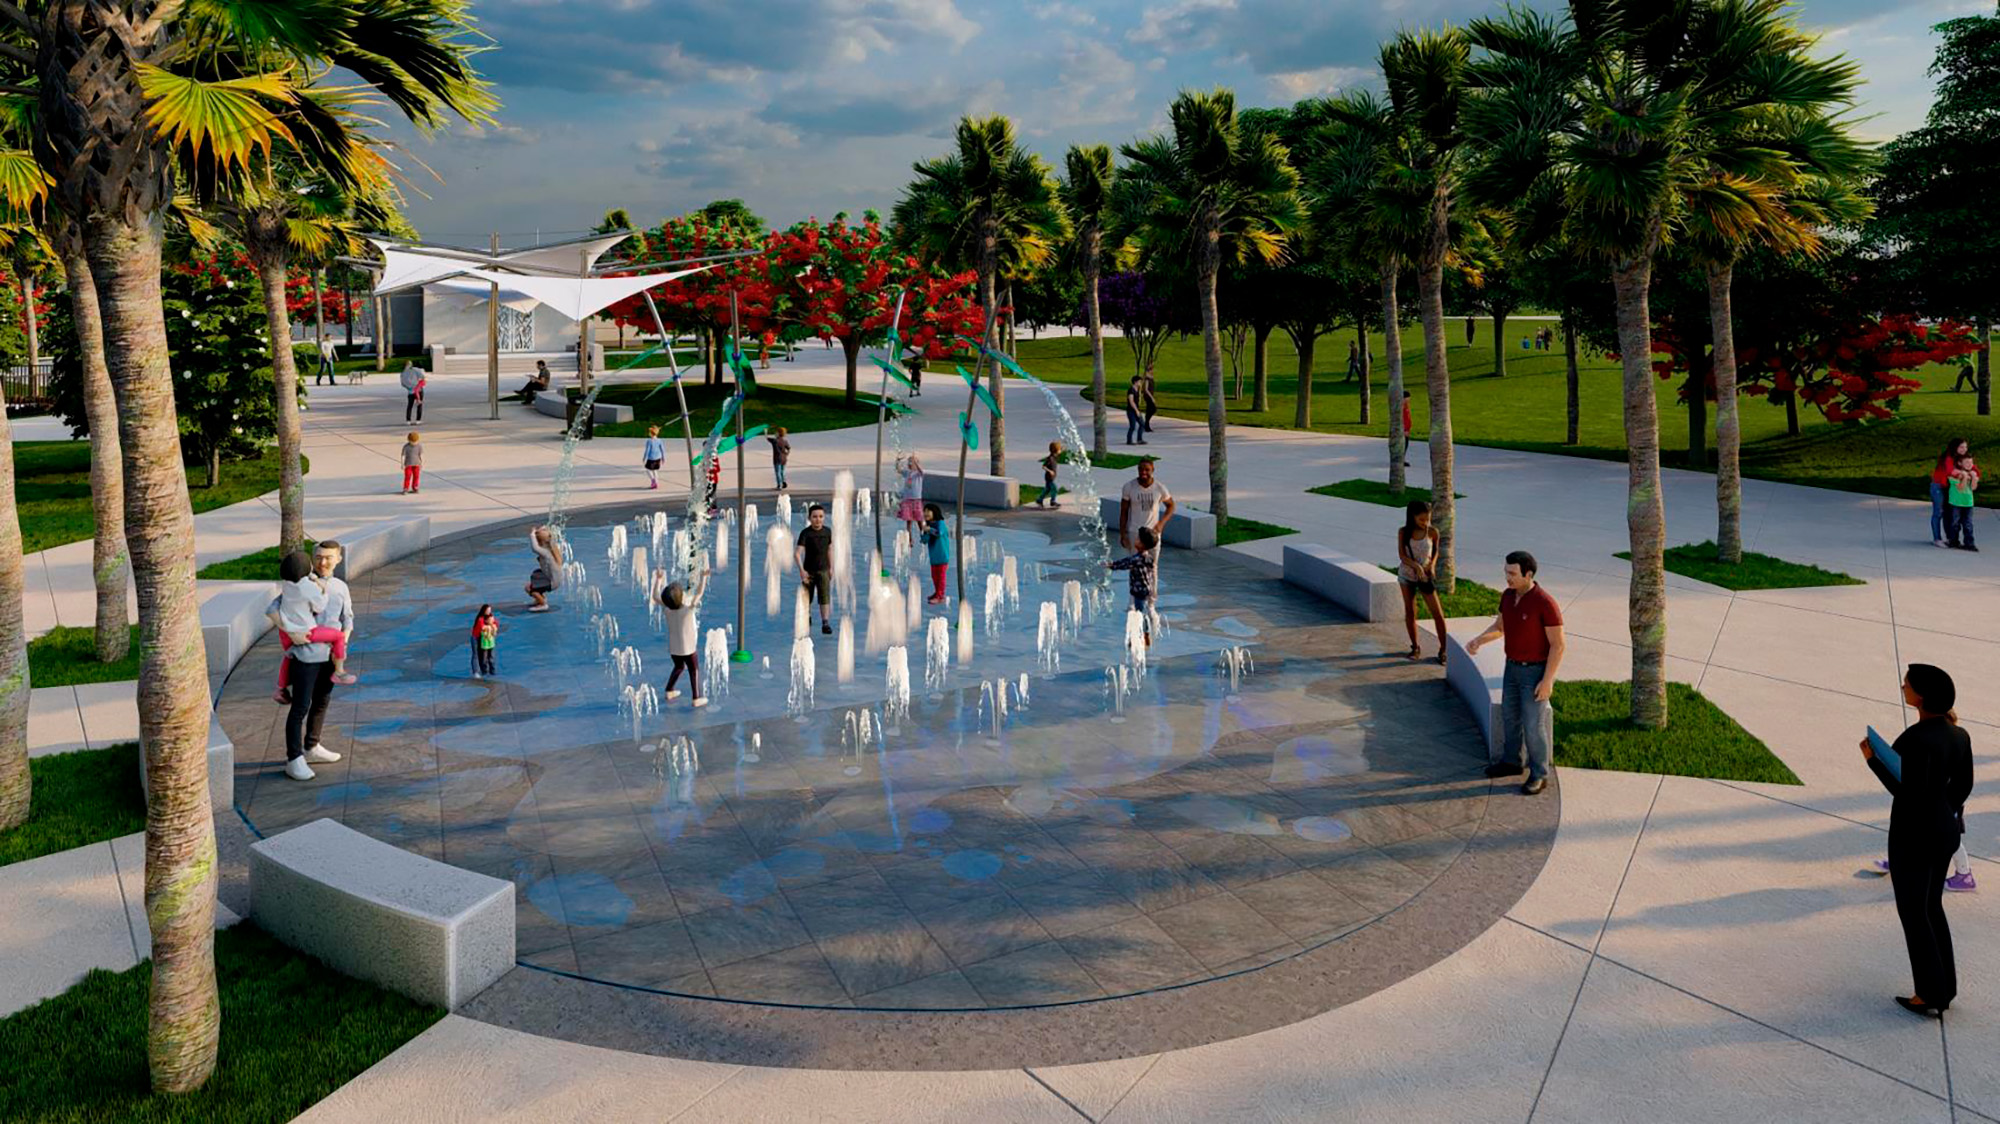 Imagine Clearwater at Coachman Park's family-friendly splashpad